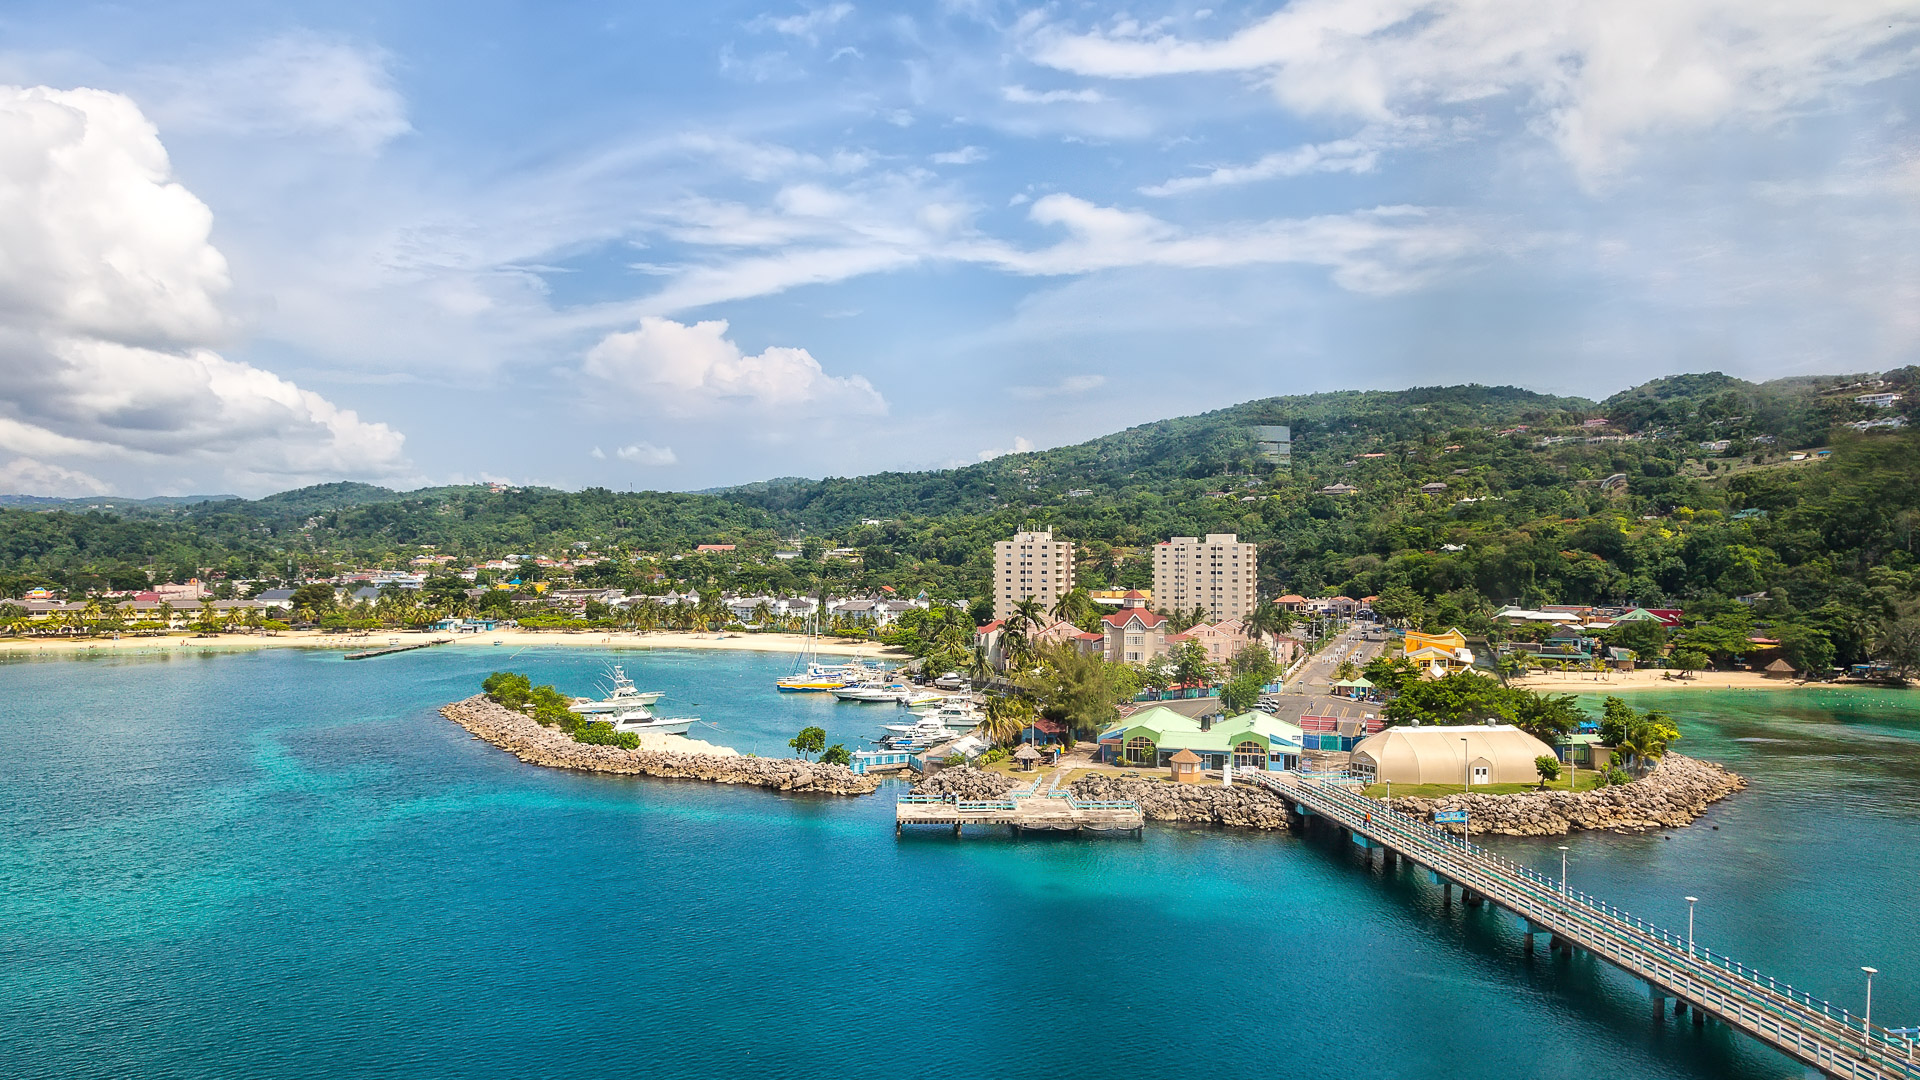 <p><strong>Average monthly cost</strong>: $1,000</p> <p>A stunning island oasis, Jamaica is a tourist-heavy location that is also home to many expats. While some areas offer more amenities than others, living near a larger city in Jamaica gives you access to better healthcare options and big-city perks you're used to, for a much lower cost than the U.S. Many speak or understand English there as well. You can retire for about $1,000 per month on average.</p>